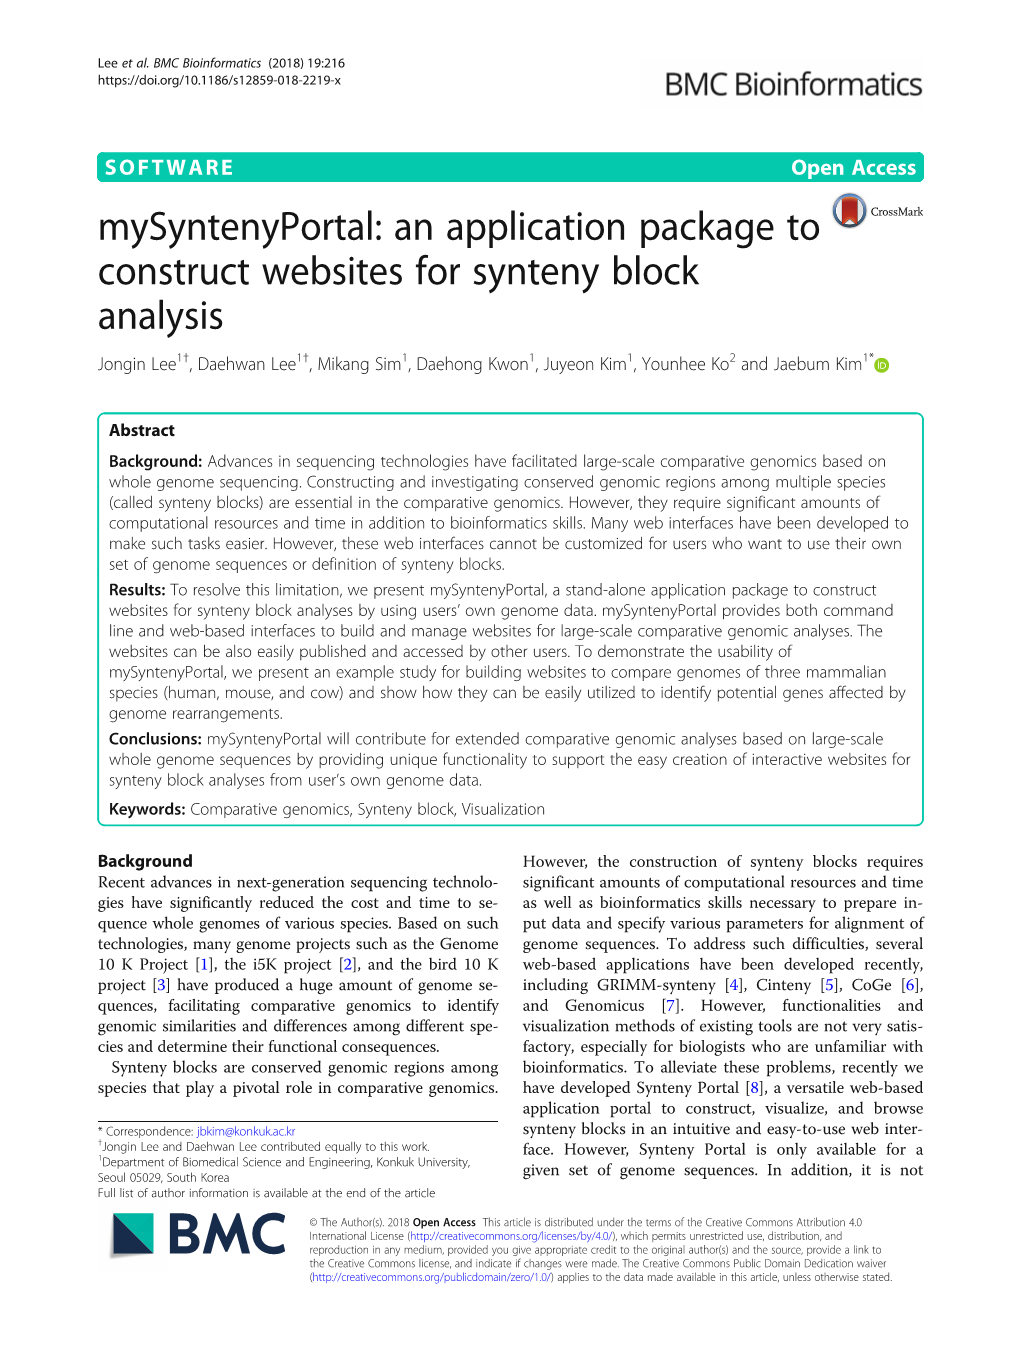 An Application Package to Construct Websites for Synteny Block Analysis